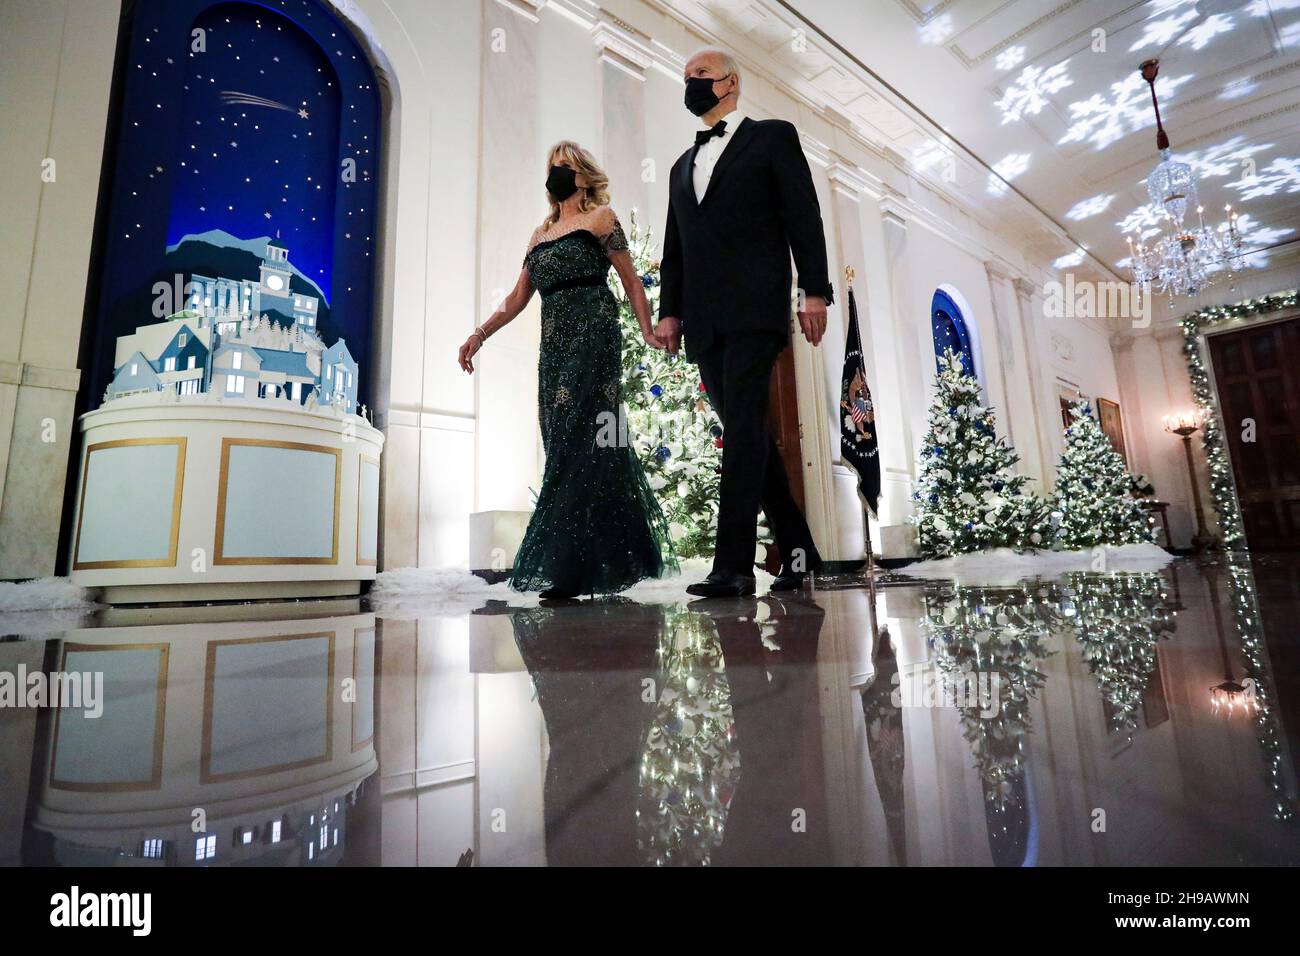 Washington, DC, U.S., on Sunday, Dec. 5, 2021. U.S. President Joe Biden and First Lady Dr. Jill Biden arrive in the Cross Hall during the Kennedy Center Honorees Reception at the White House in Washington, DC, U.S., on Sunday, Dec. 5, 2021. The John F. Kennedy Center for the Performing Arts 44th Honorees for lifetime artistic achievements include operatic bass-baritone Justino Diaz, Motown founder Berry Gordy, Saturday Night Live creator Lorne Michaels, actress Bette Midler, and singer-songwriter Joni Mitchell. Credit: Al Drago/Pool via CNP /MediaPunch Stock Photo